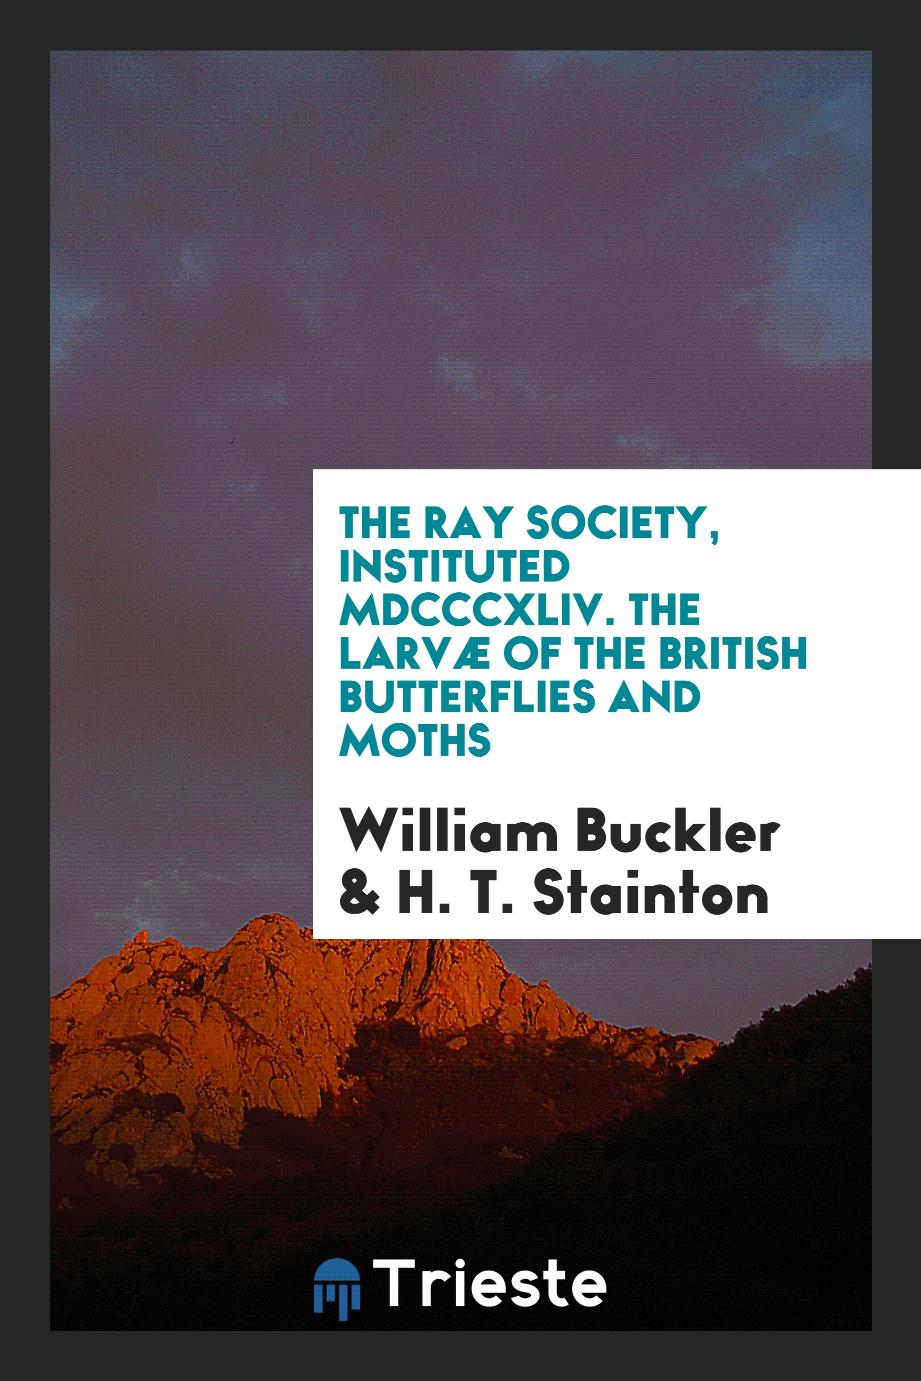 The Ray Society, Instituted MDCCCXLIV. The Larvæ of the British Butterflies and Moths